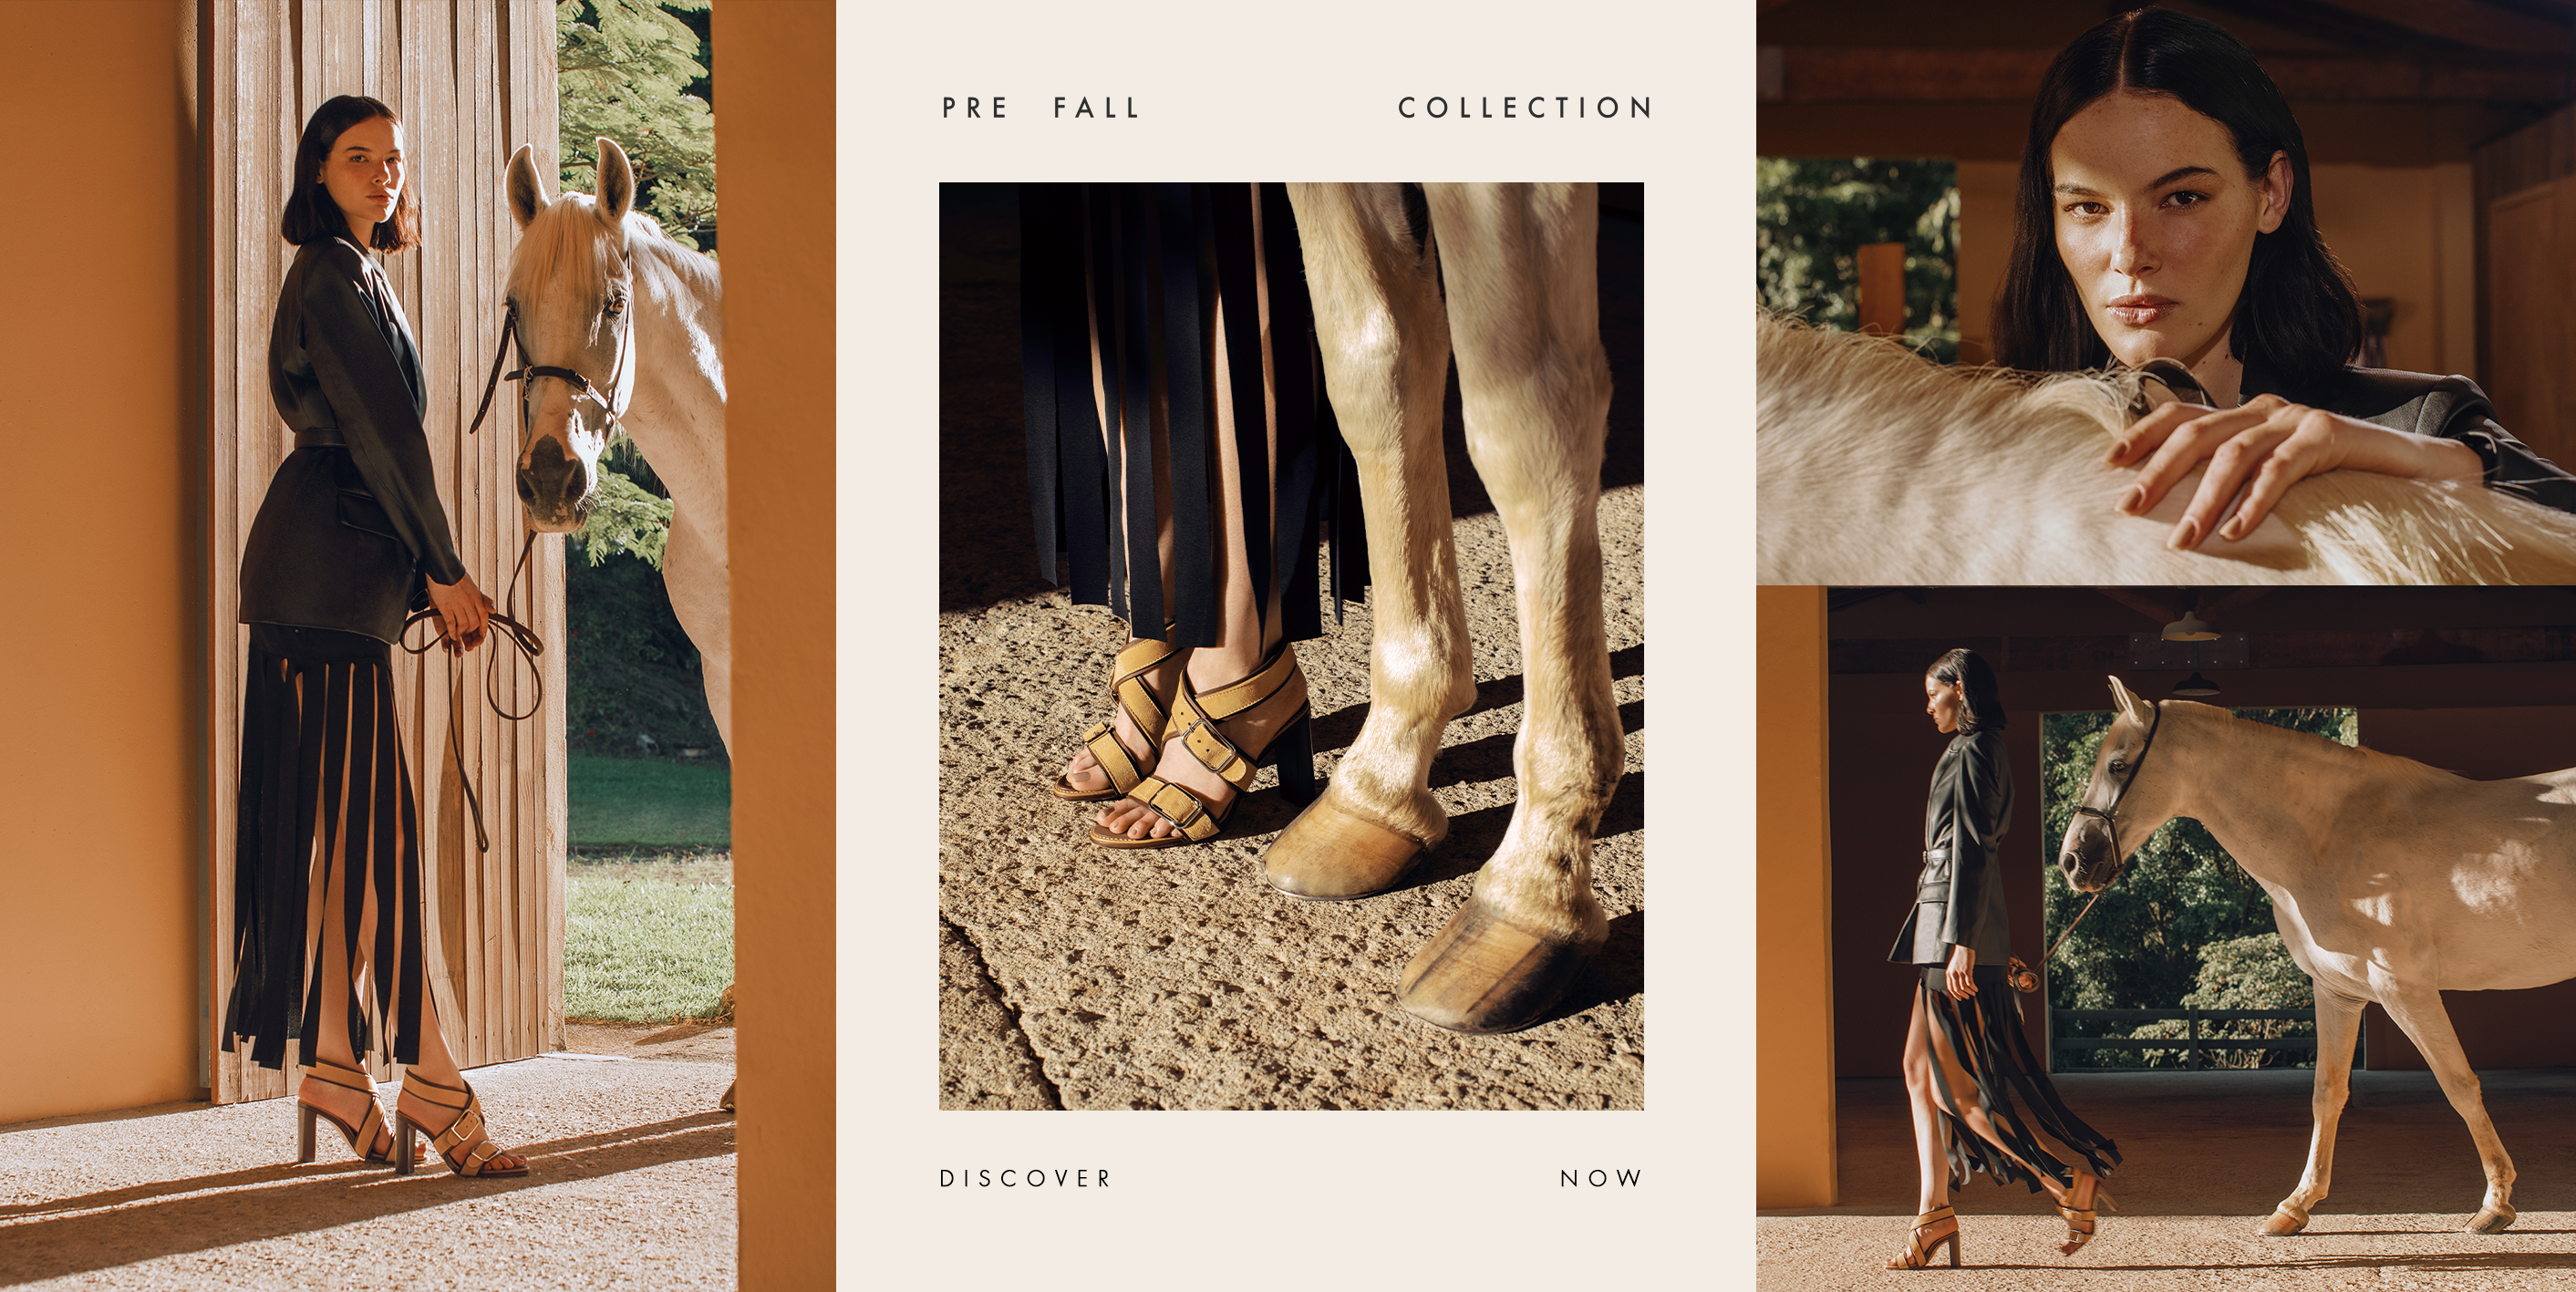 Embrace Pre-Fall: Collage featuring a woman handling a white horse, wearing Effie Sandal in Butterscotch. Text reads 'PRE FALL COLLECTION DISCOVER NOW.